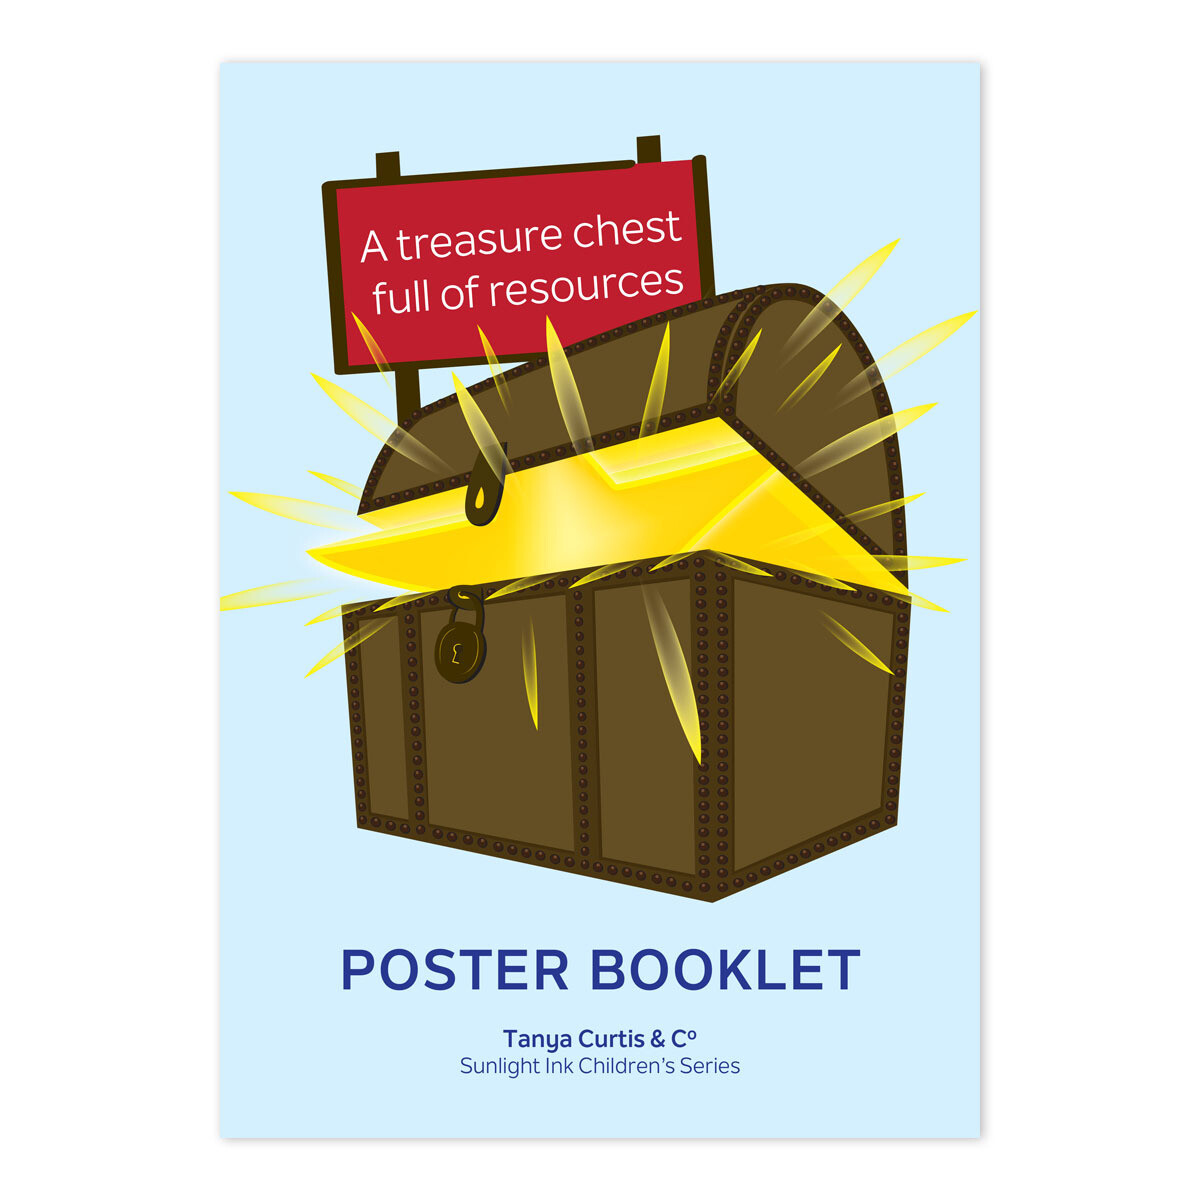 Poster Booklet – A treasure chest full of resources